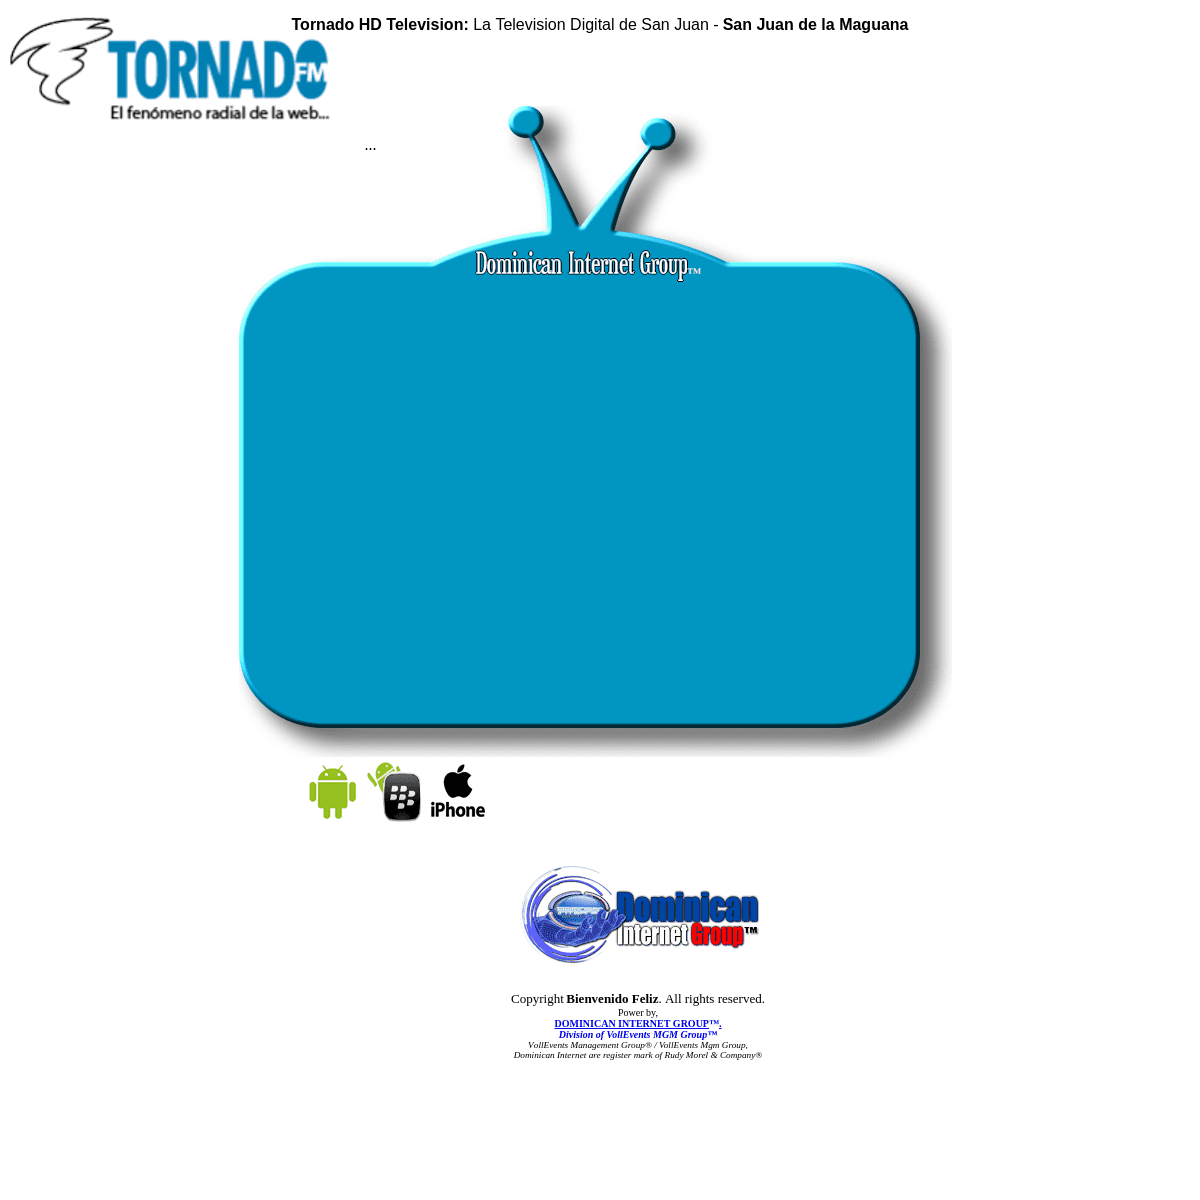 TORNADO TV | By DOMINICAN INTERNET GROUP